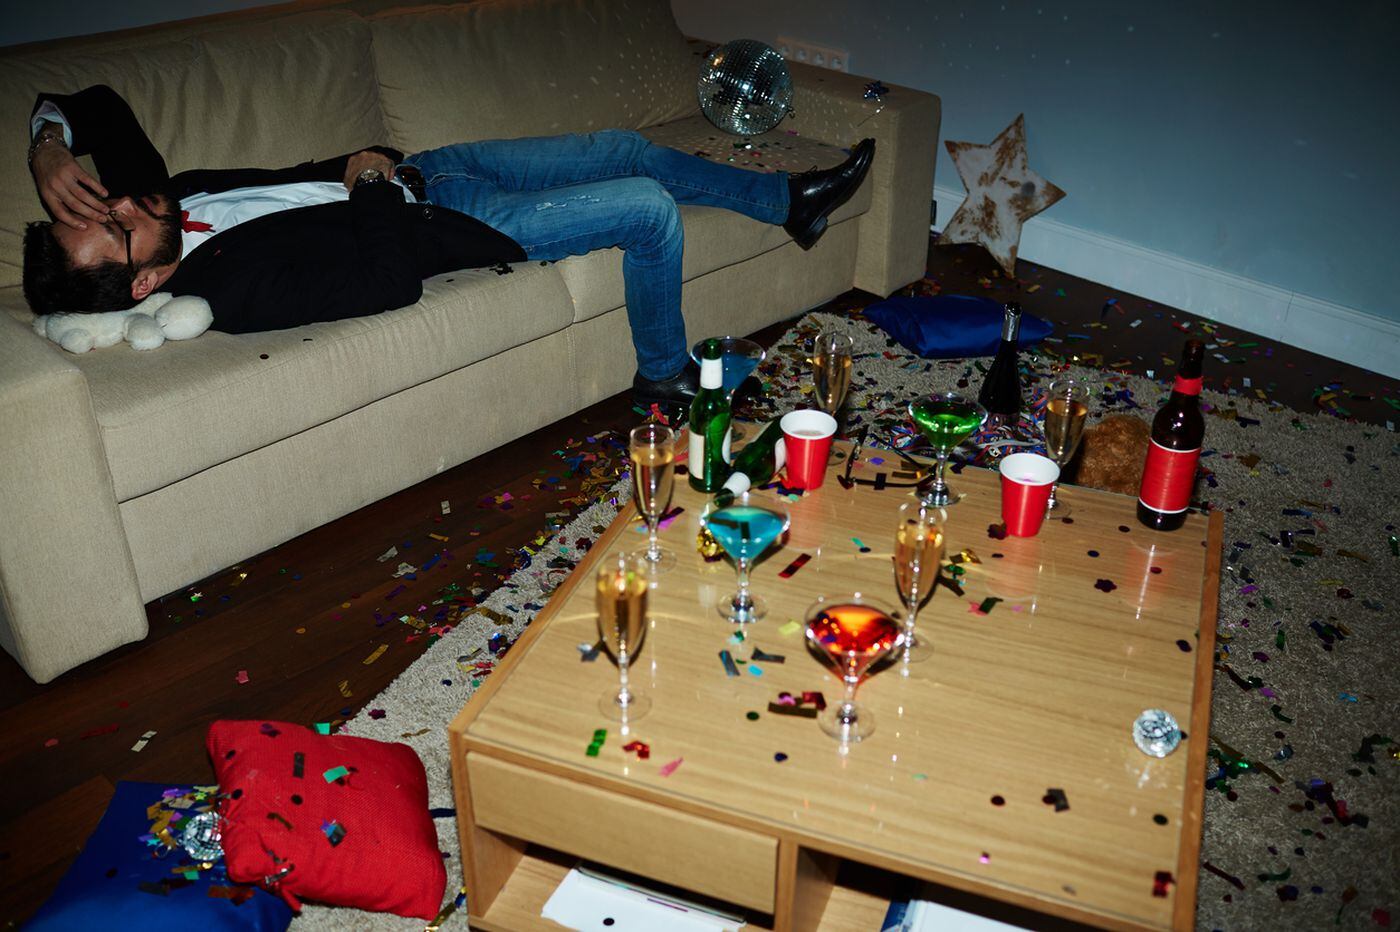 is blackout drinking the same as passing out from alcohol? a penn